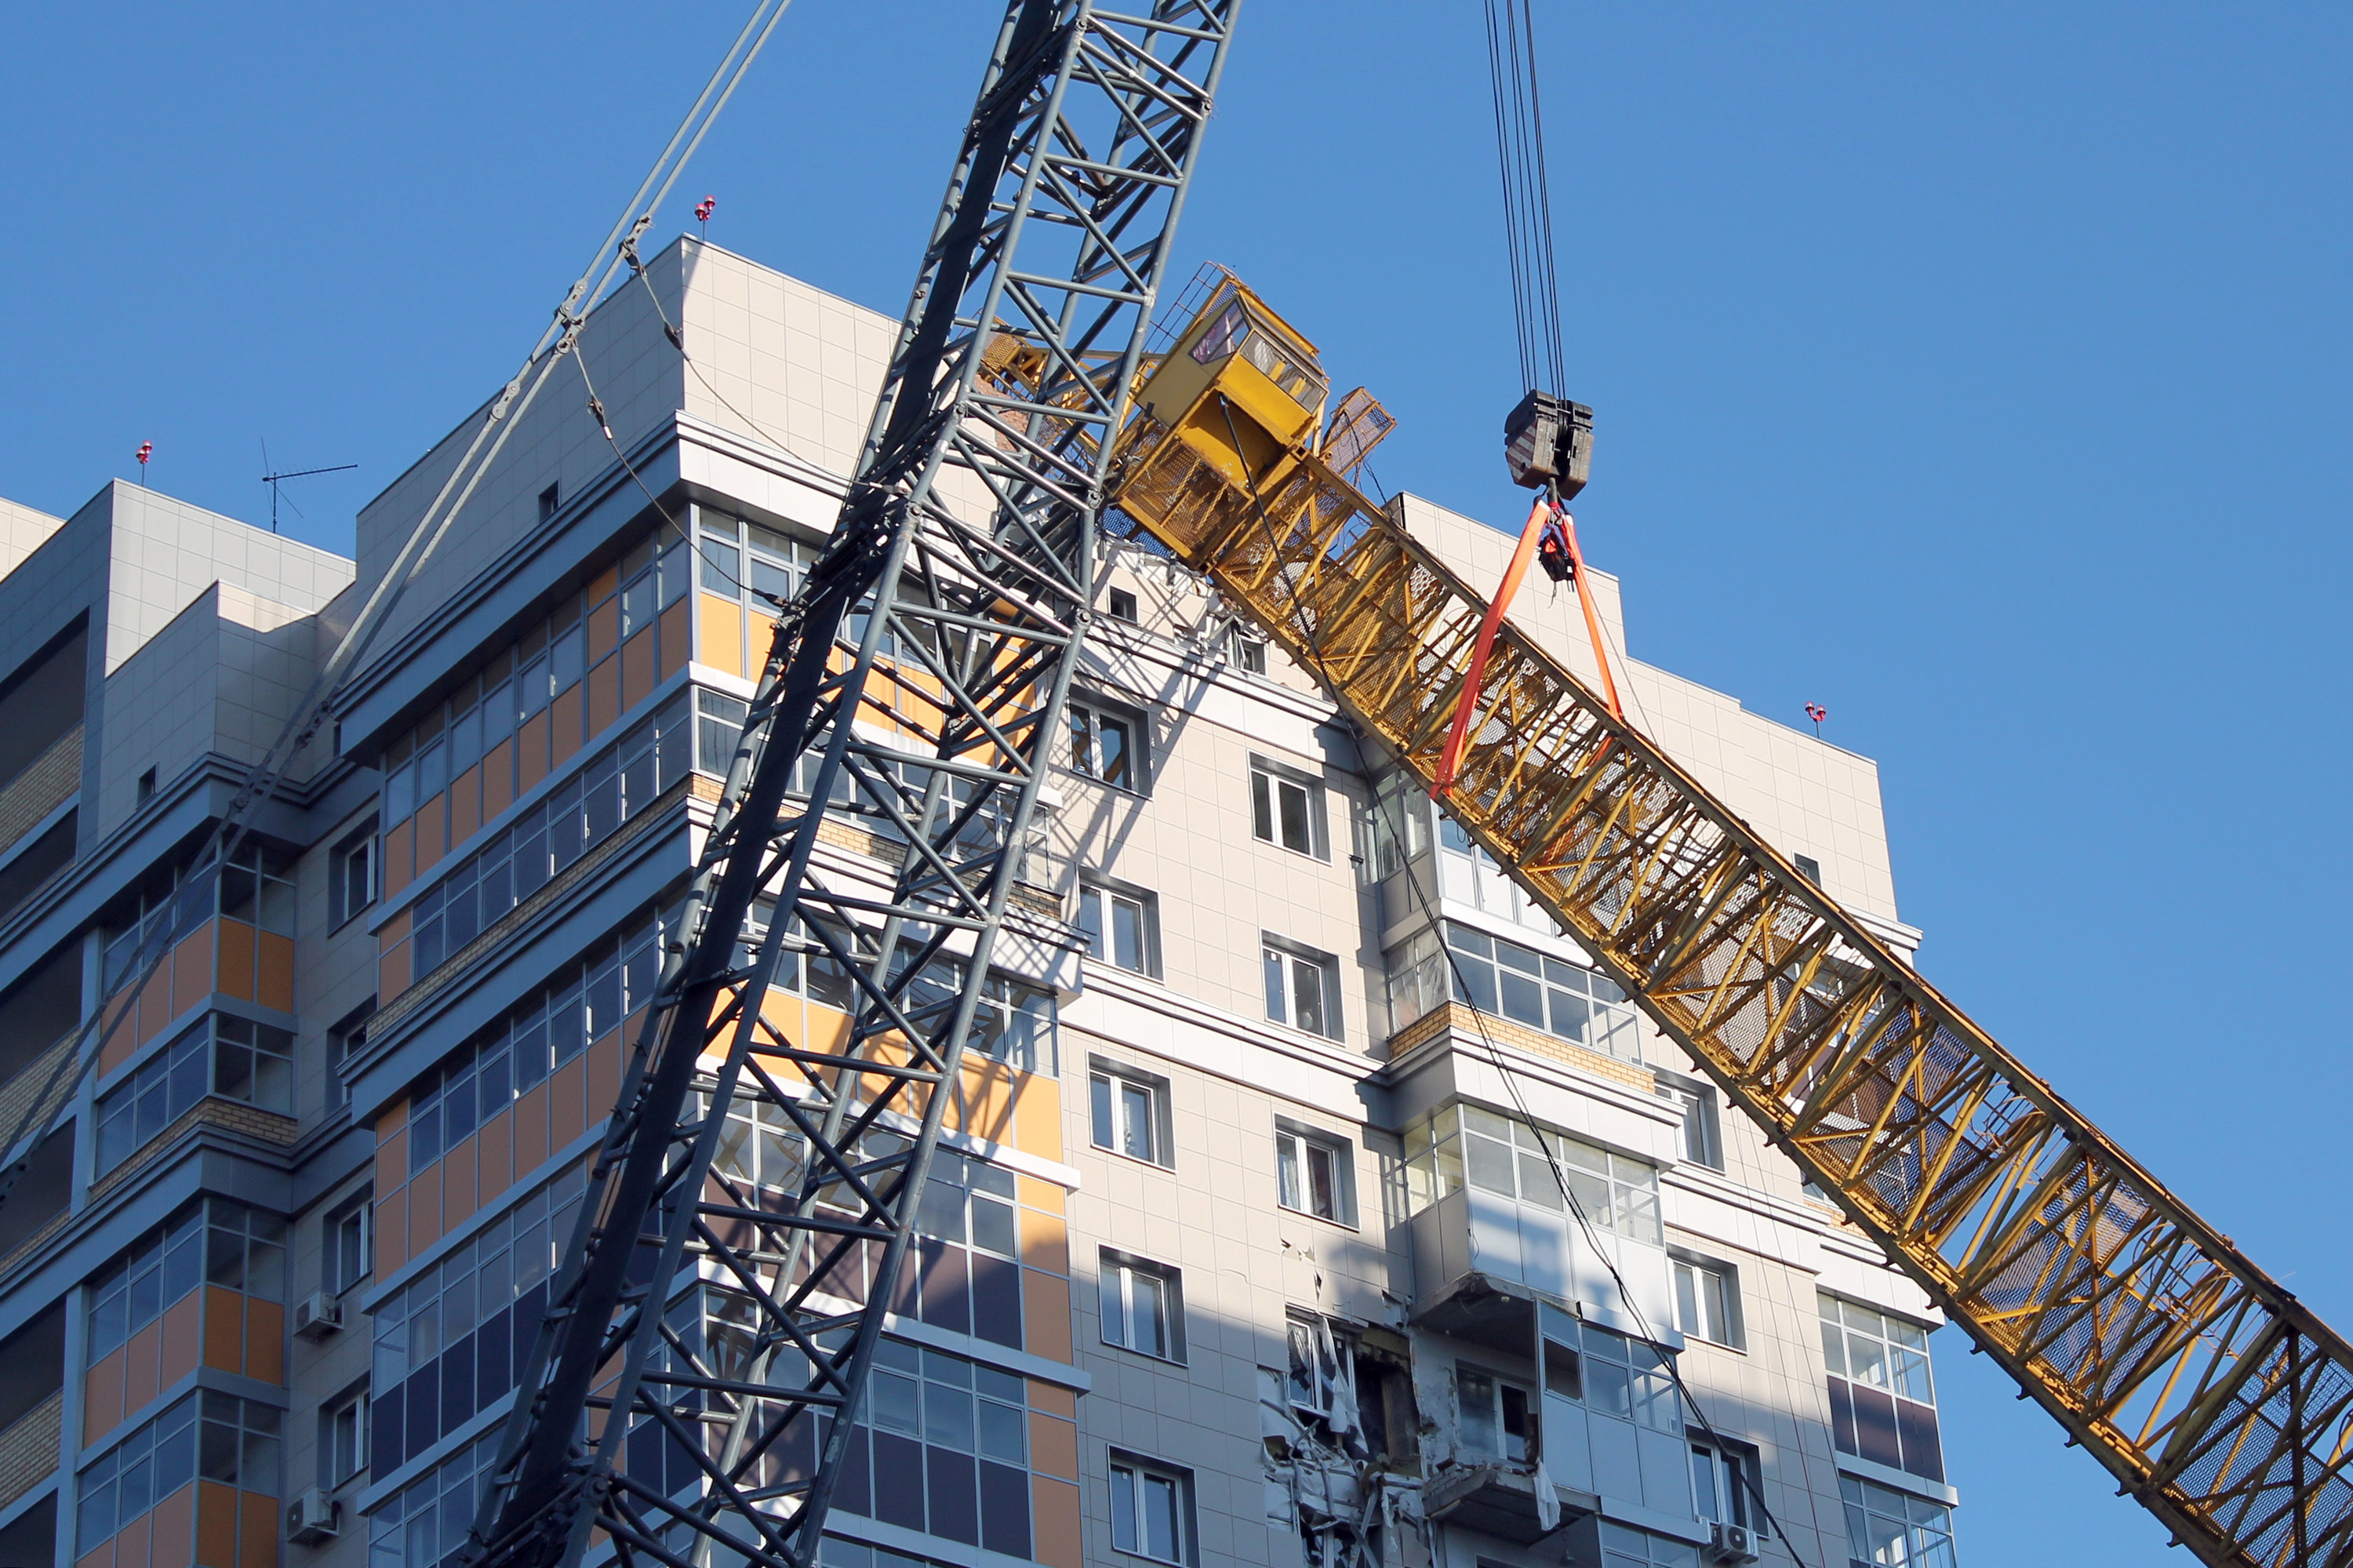 Large crane fallen from a tall building roof